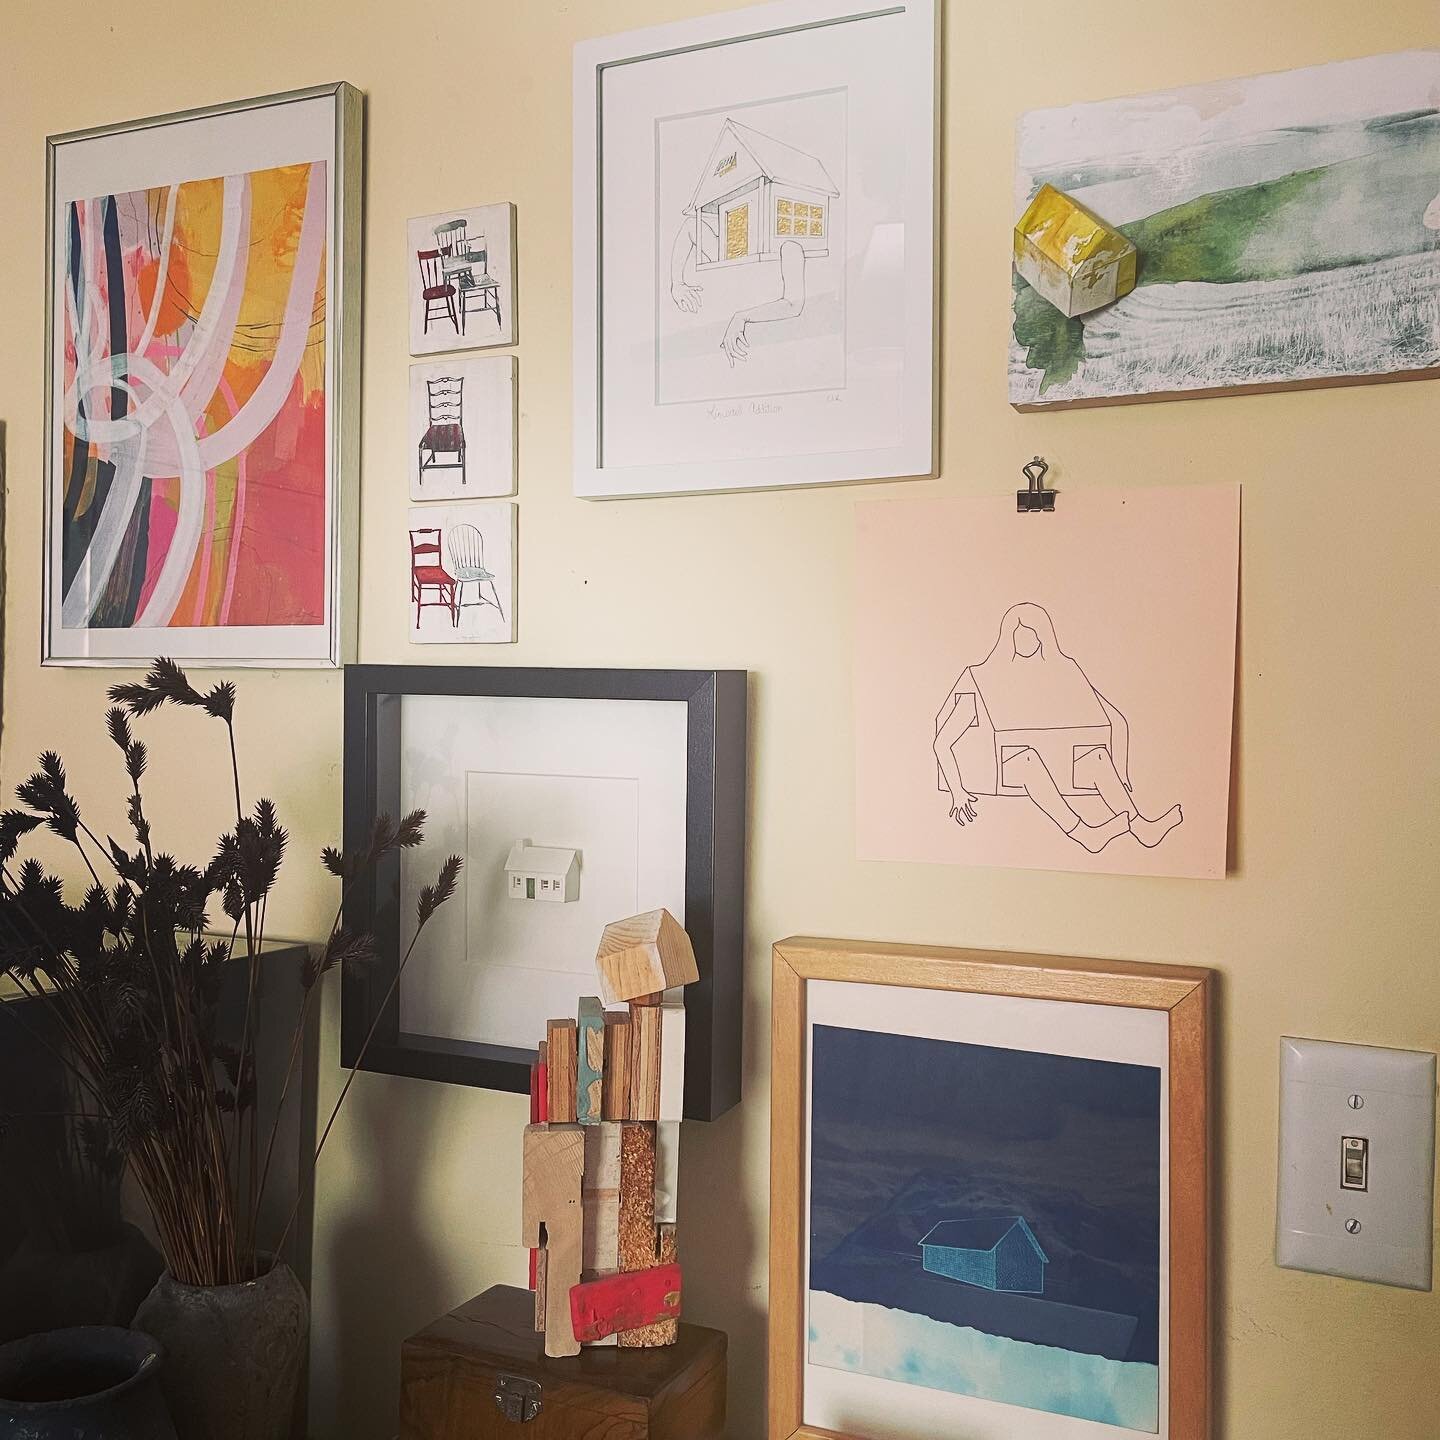 One of my art collections - the tiny houses and colors 
.
.
.
#artcollector #artistartcollection #gallerywall #tinyhouseart #sfbayareaartist #buyartfromartists #artisttrade